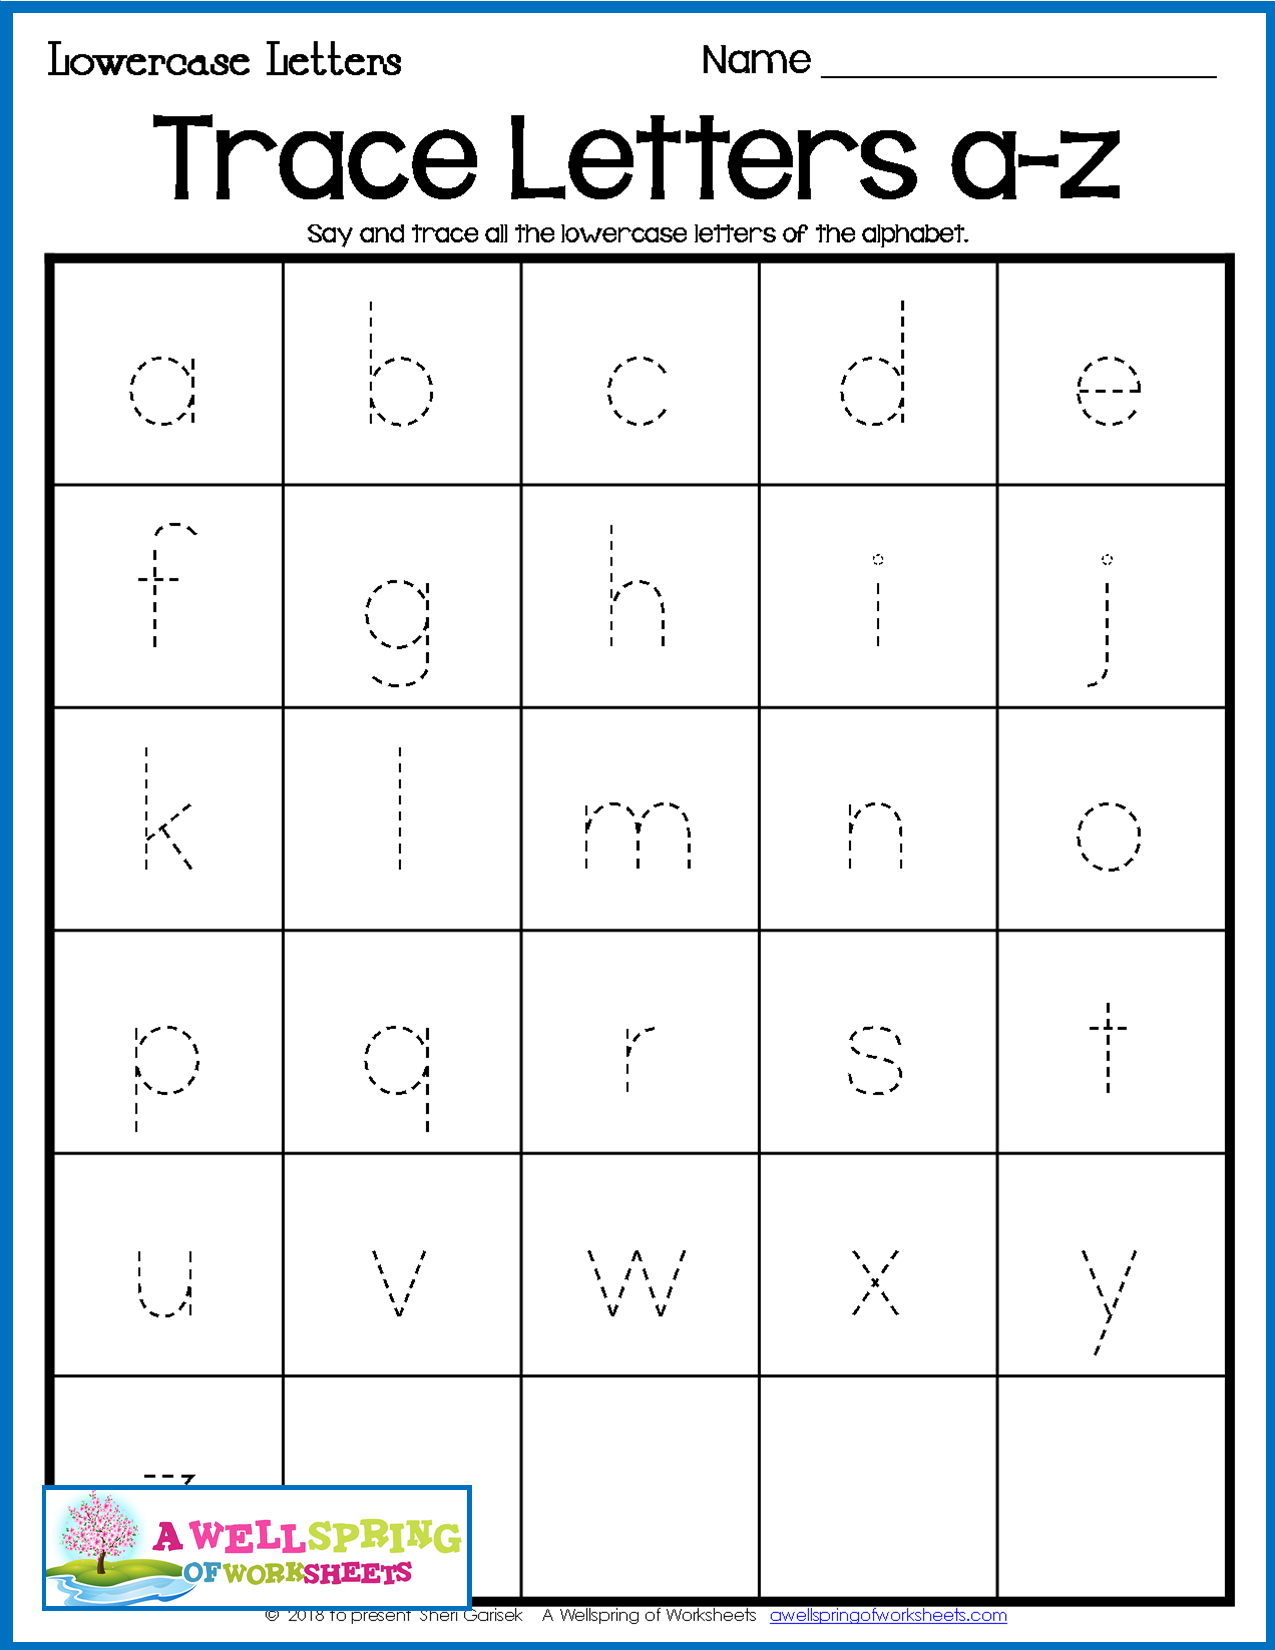 free-printable-for-tracing-letters-numbers-tracing-worksheets-number-tracing-worksheets-1-10